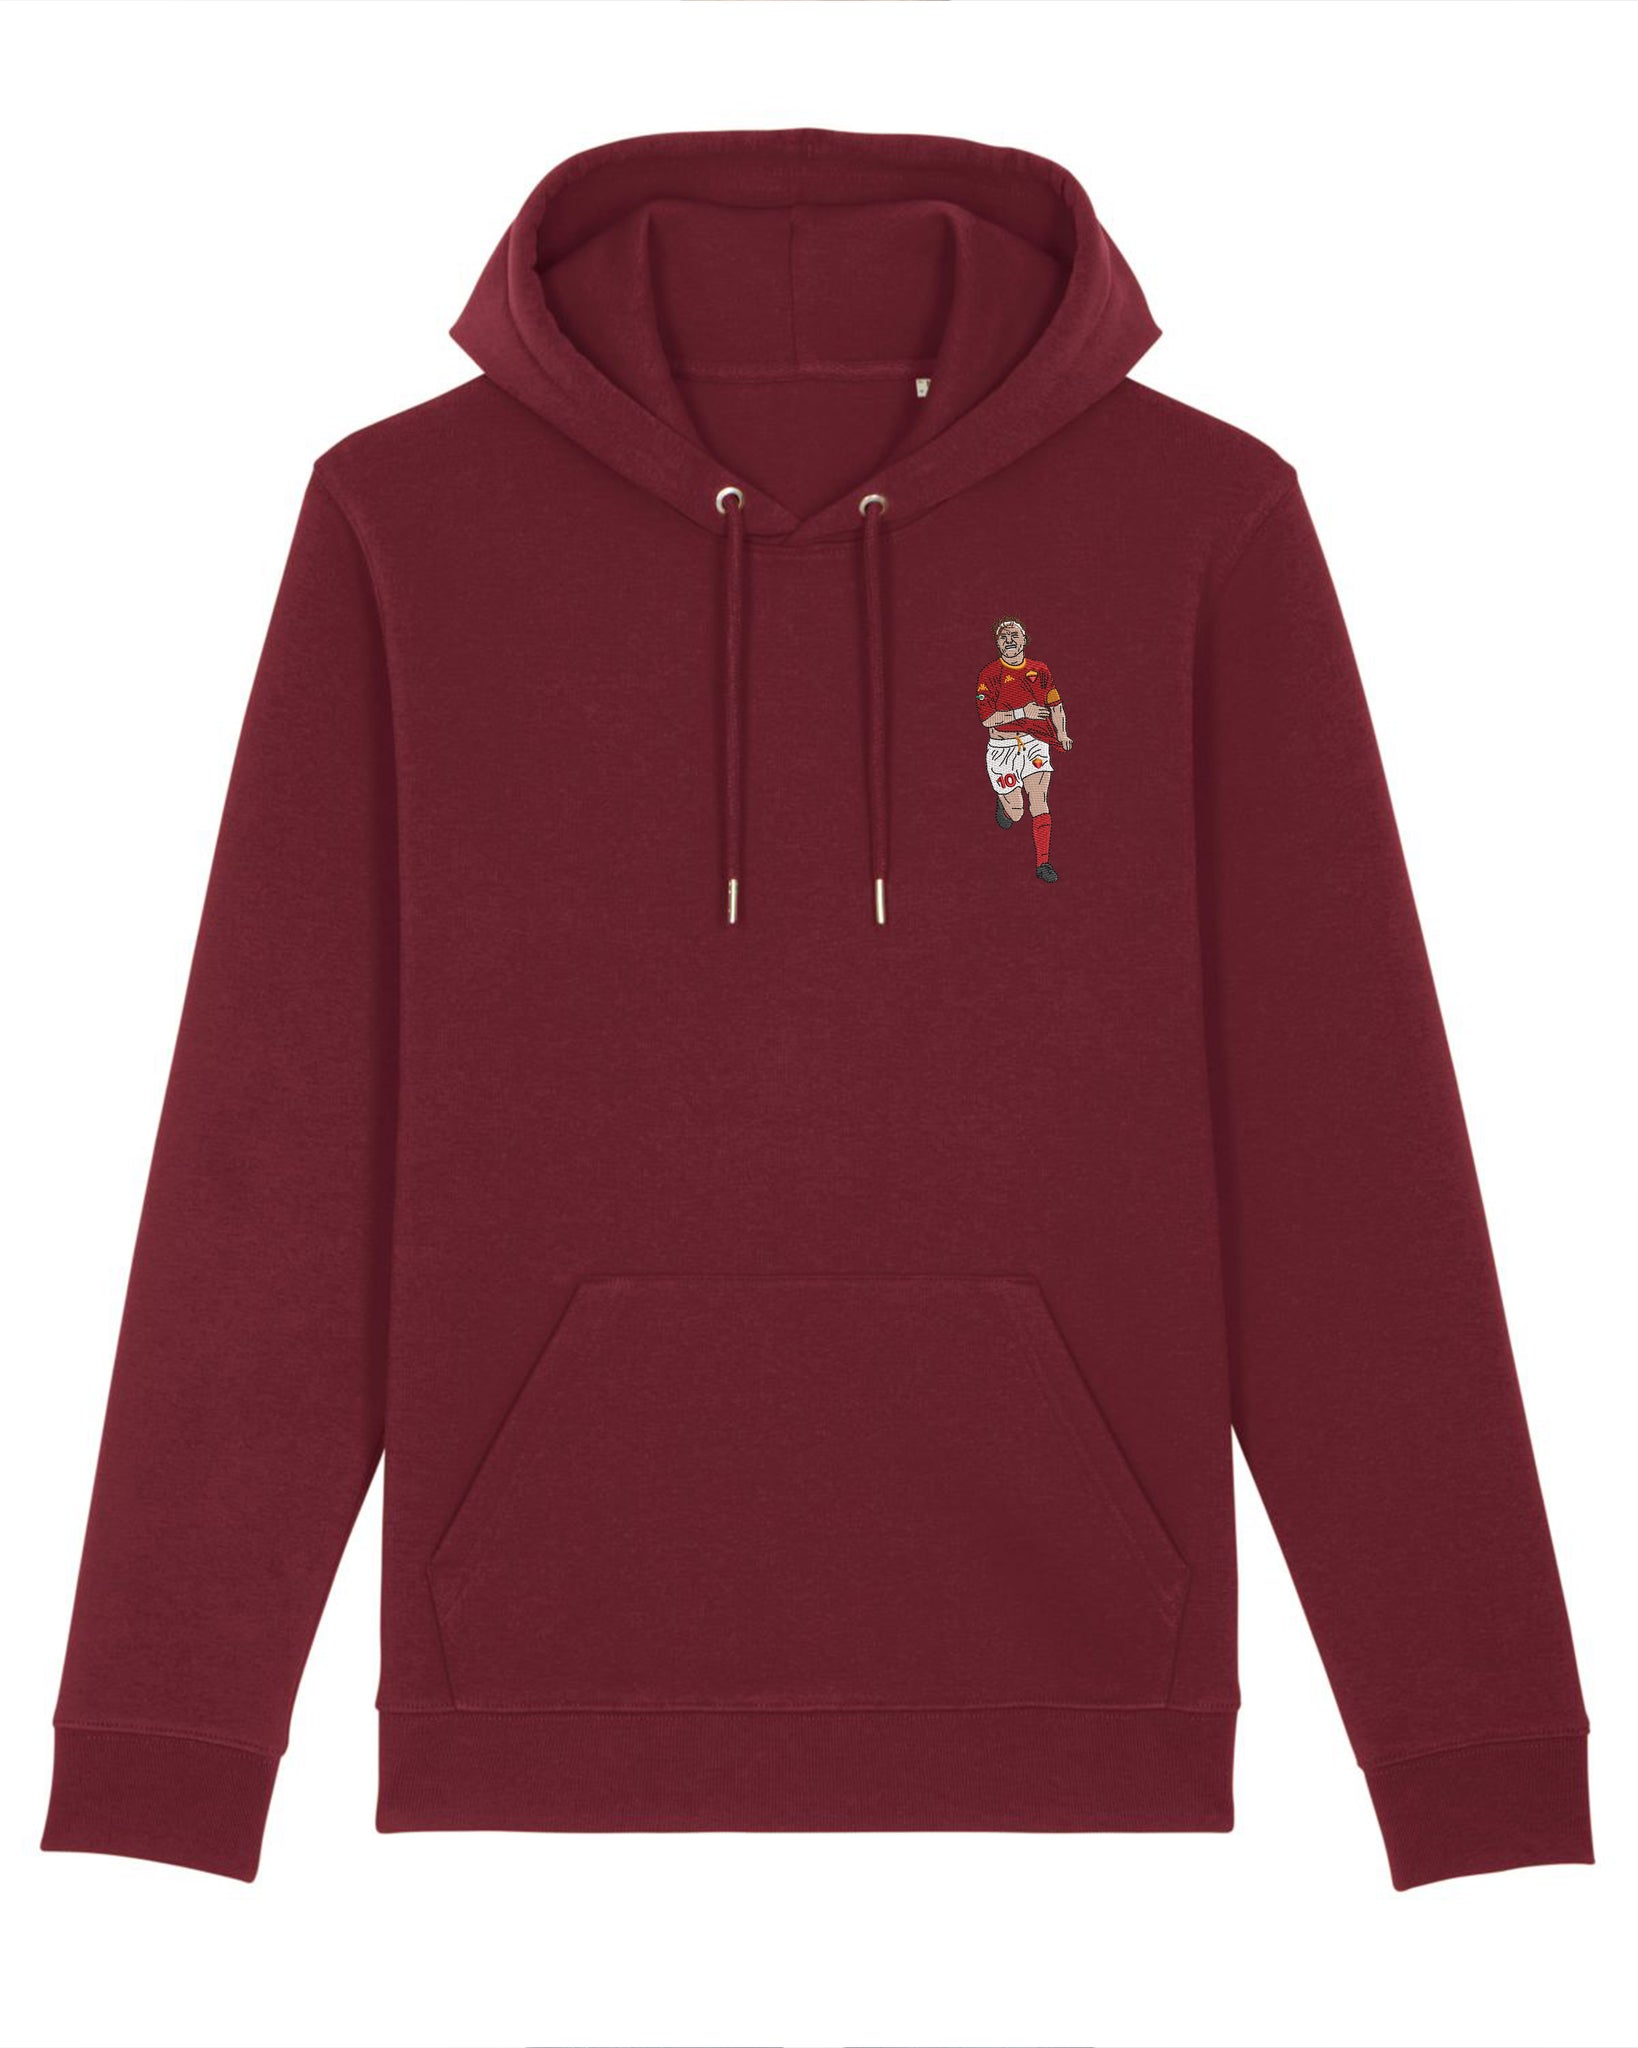 Embroidered Totti 2001 Hoodie